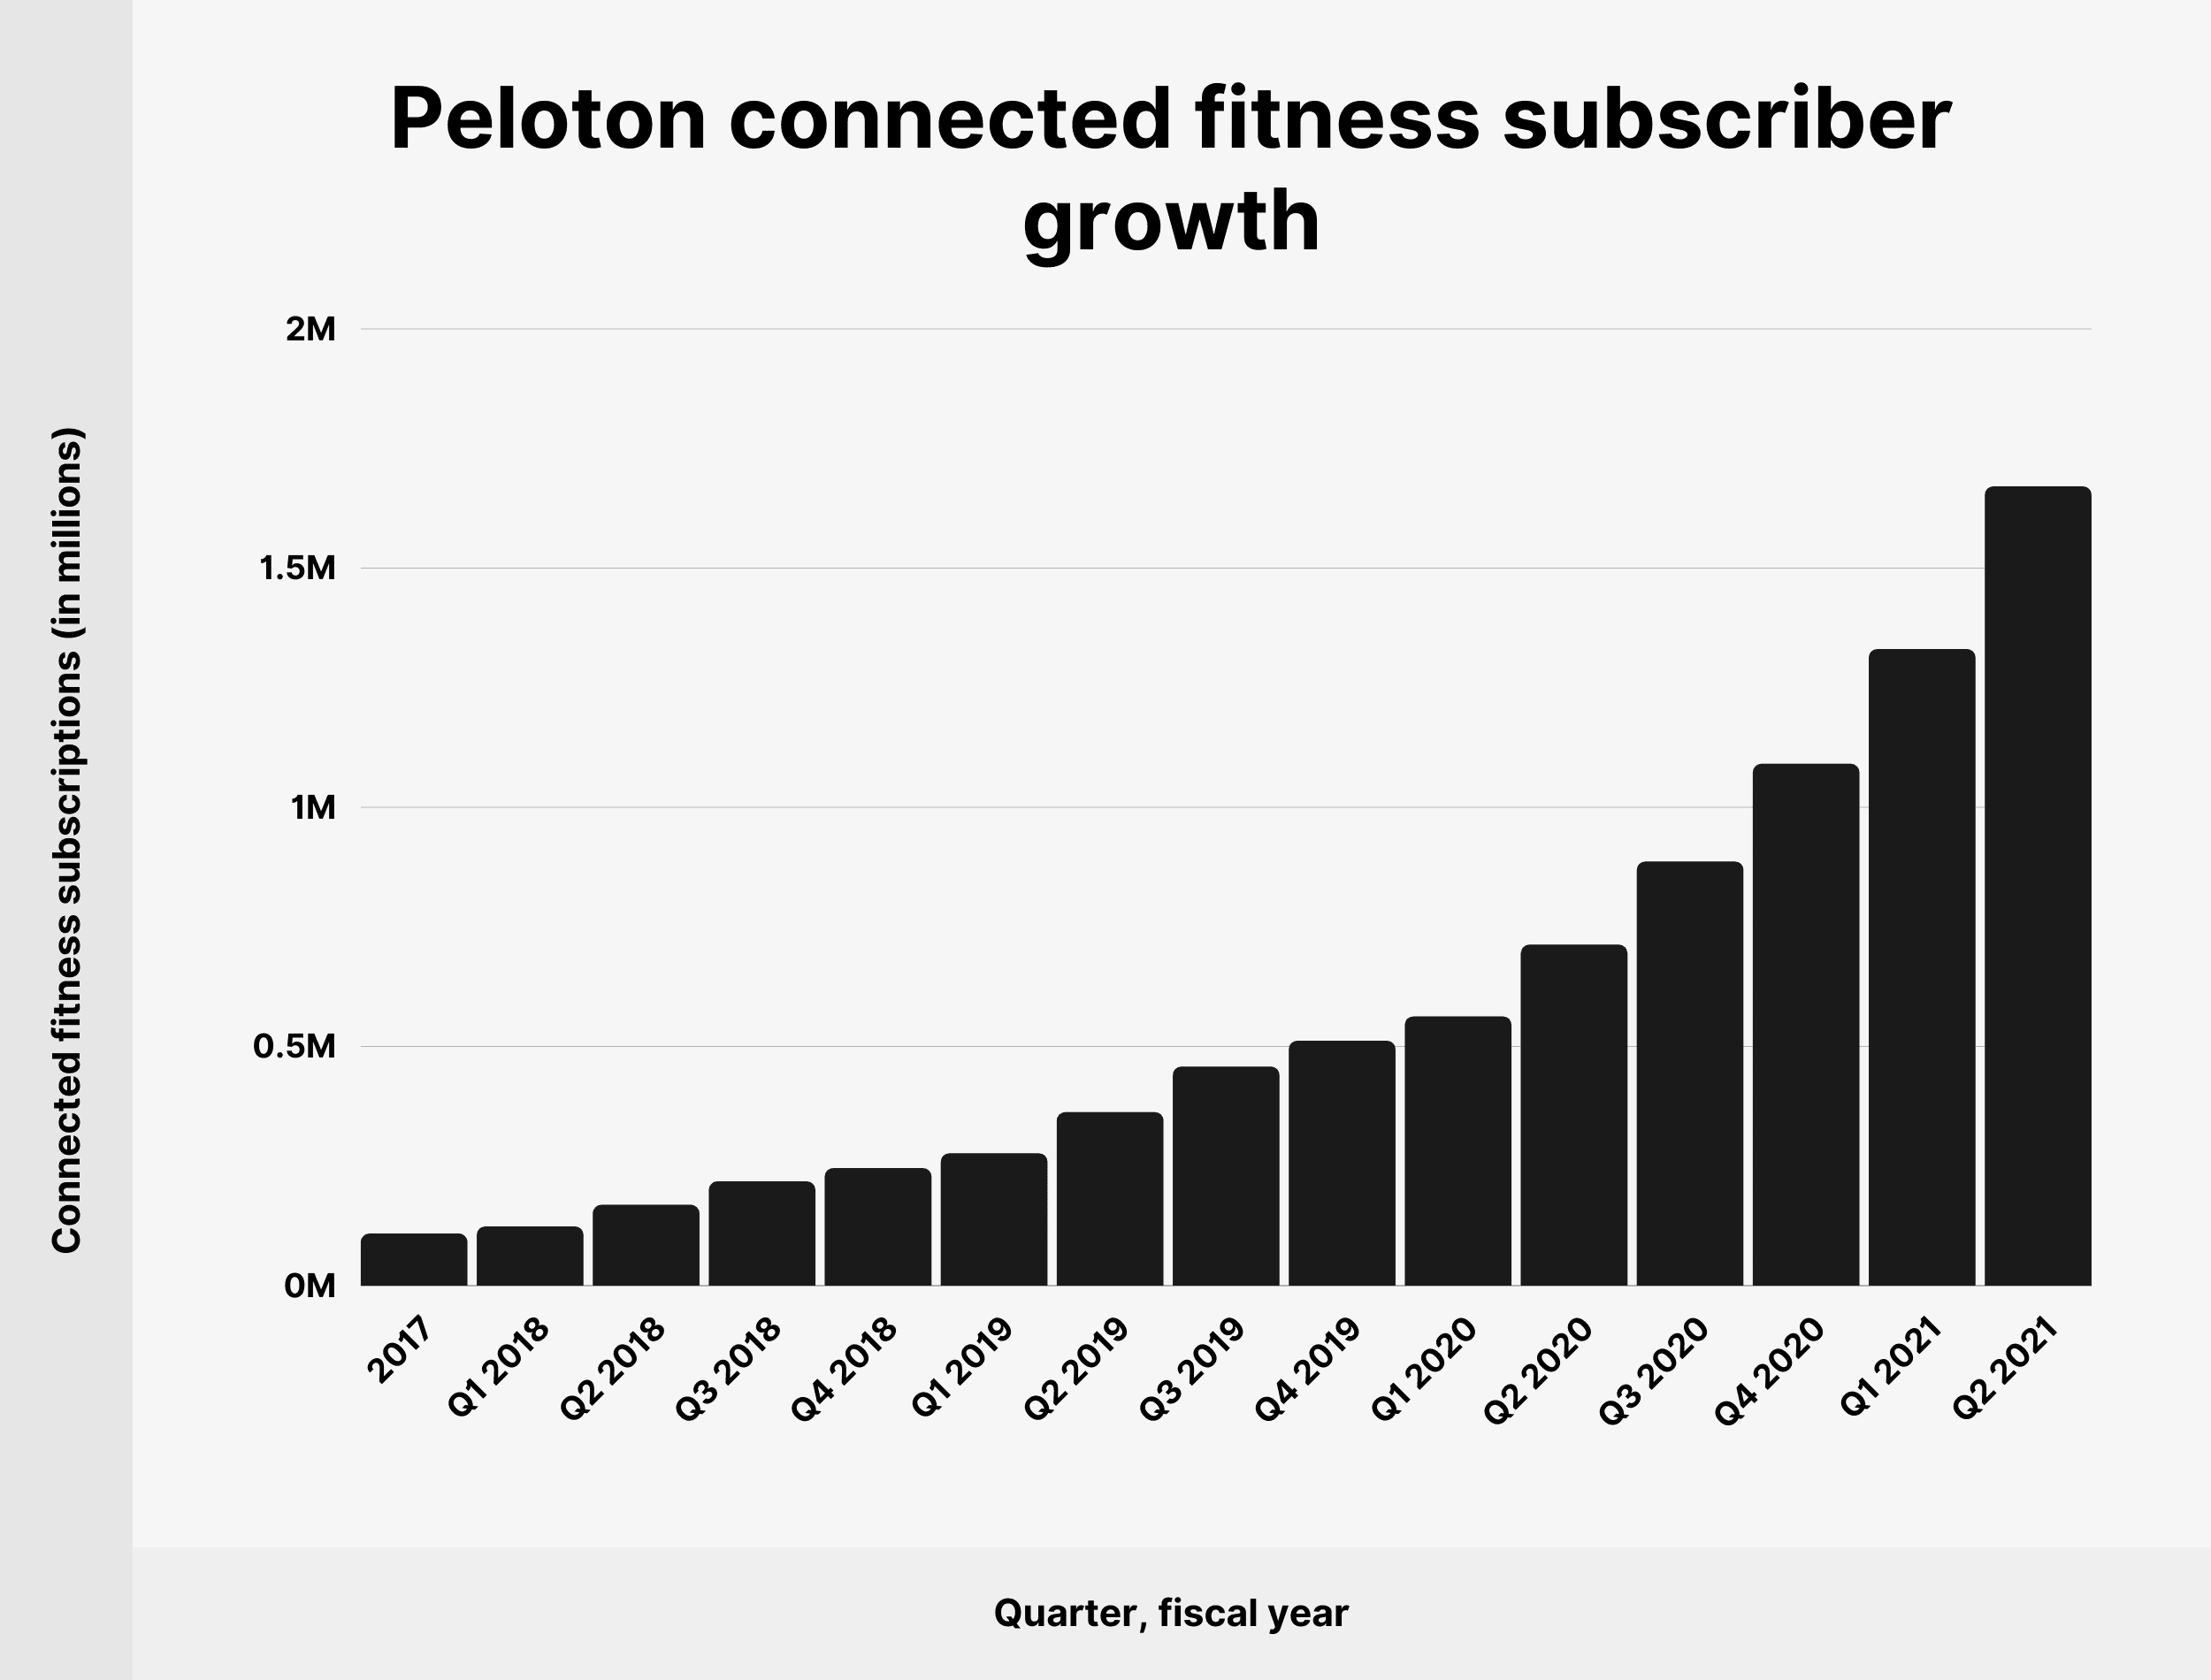 Peloton connected fitness subscriber growth